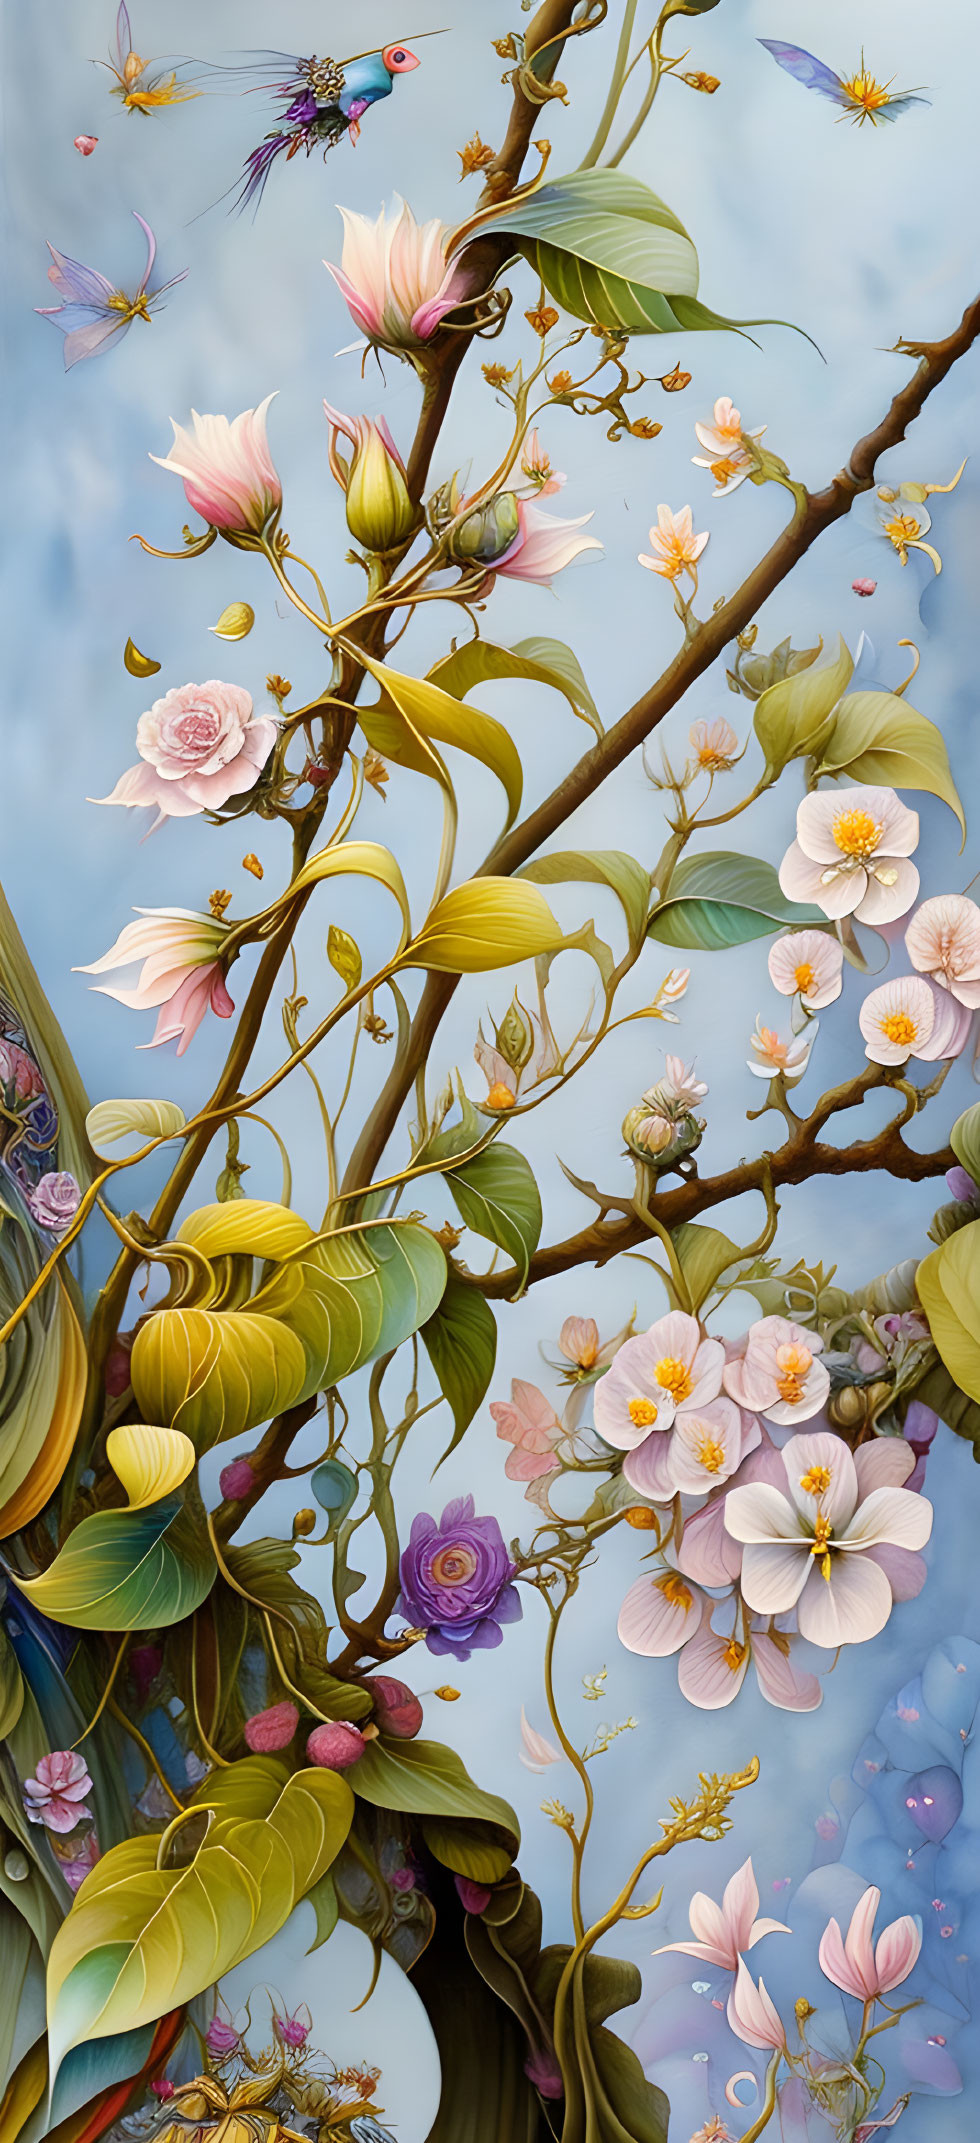 Colorful Flowers, Birds, and Butterflies on Branches in Blue Sky